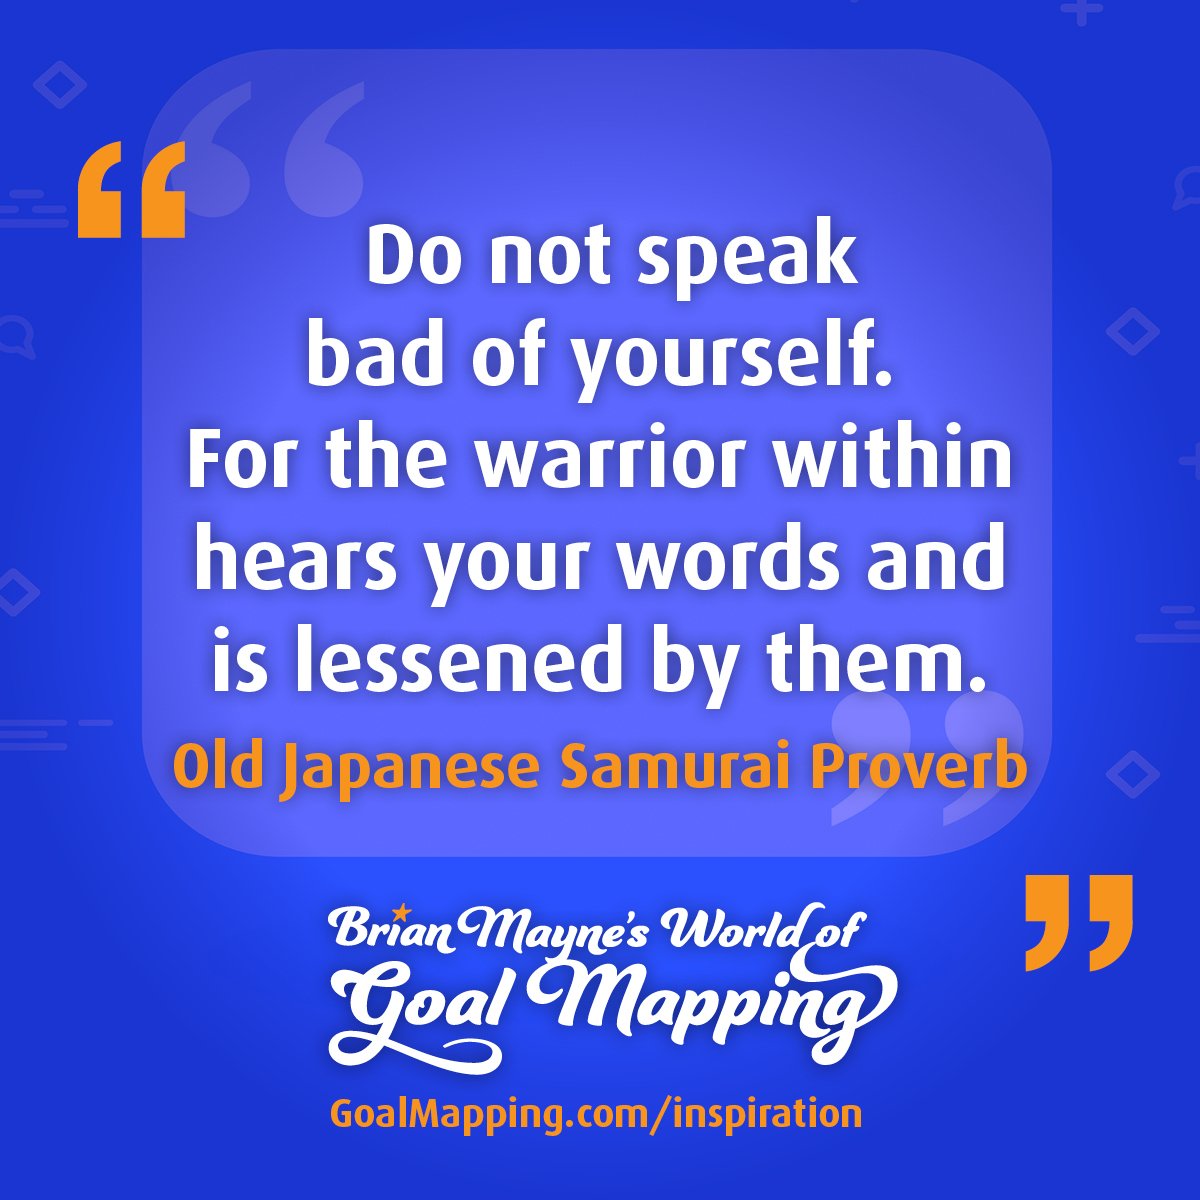 "Do not speak bad of yourself.For the warrior within hears your words and is lessened by them." Old Japanese Samurai Proverb